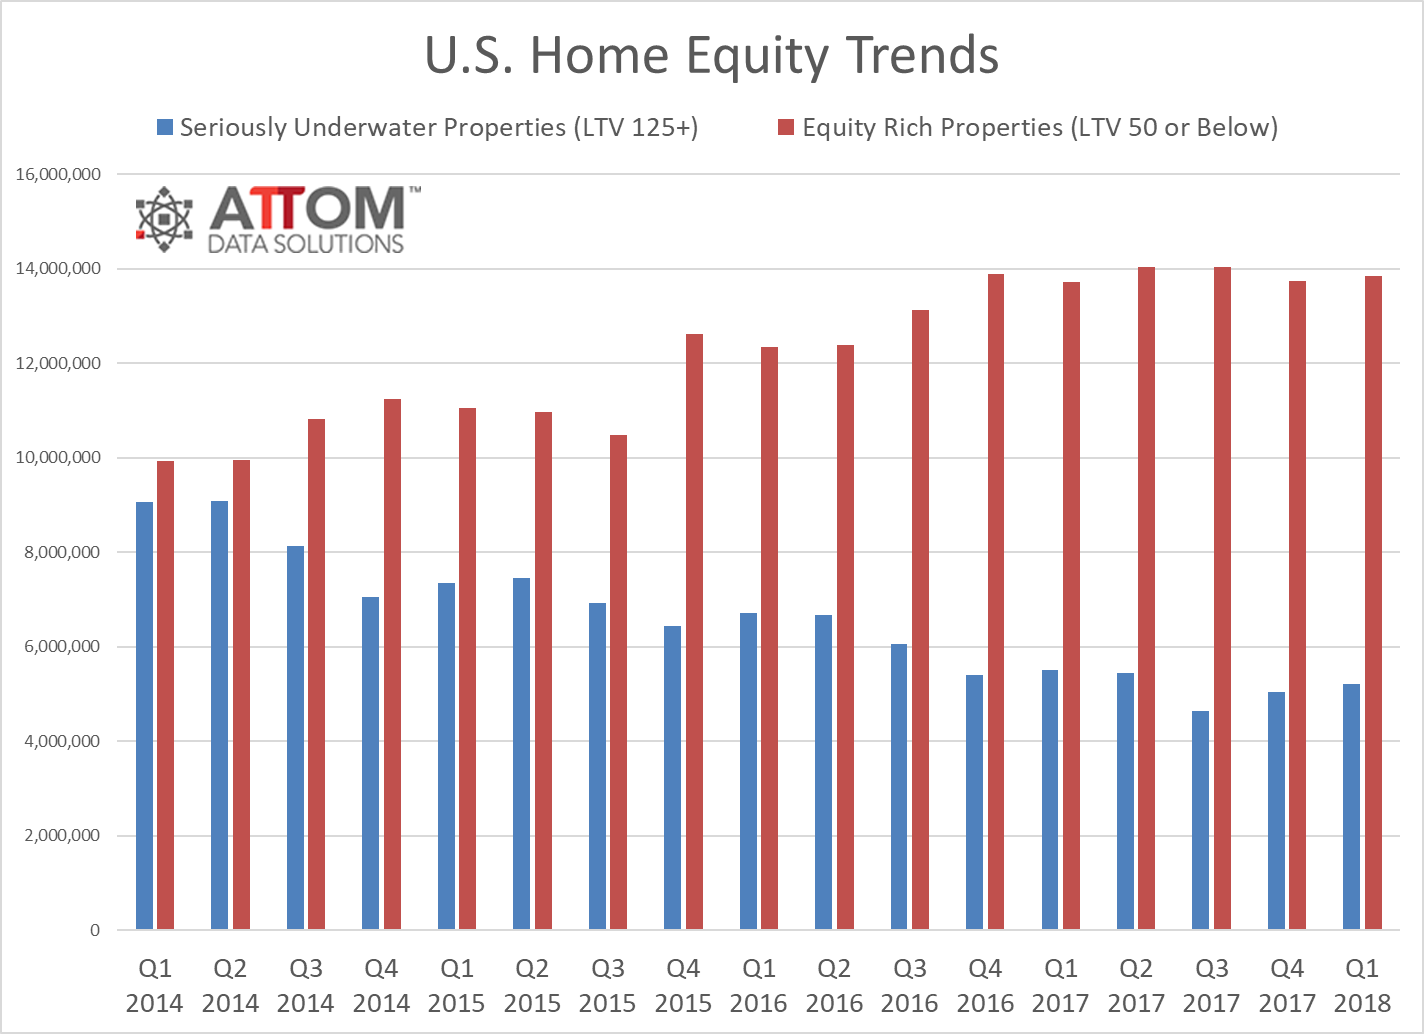 More than 5.2 million residential properties were seriously underwater during the first quarter of this year, according to new statistics released by ATTOM Data Solutions